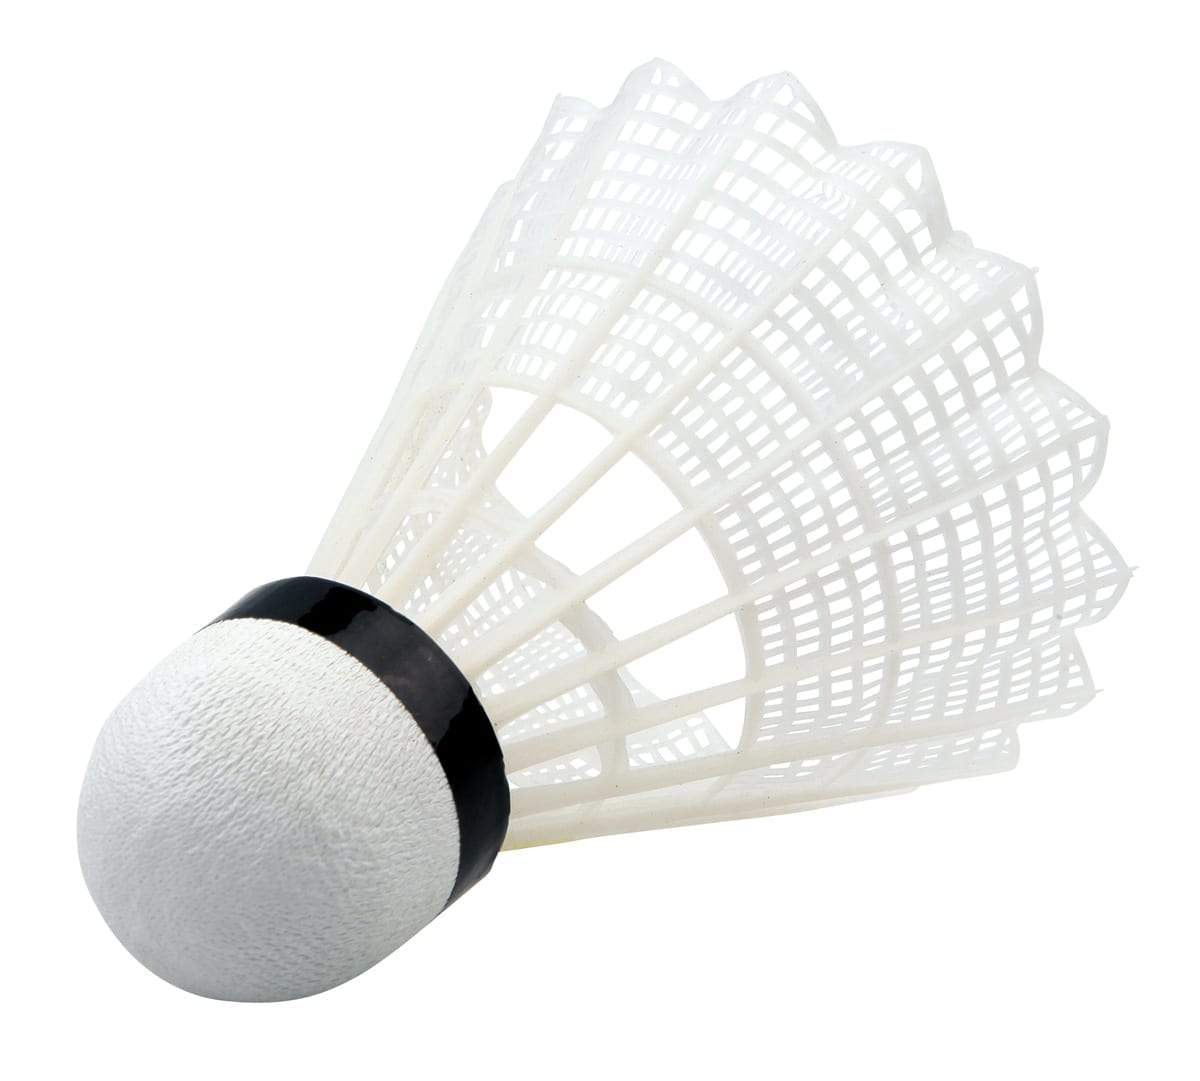 Racket Feather Shuttles Cocks Pack Of 6 In Pakistan